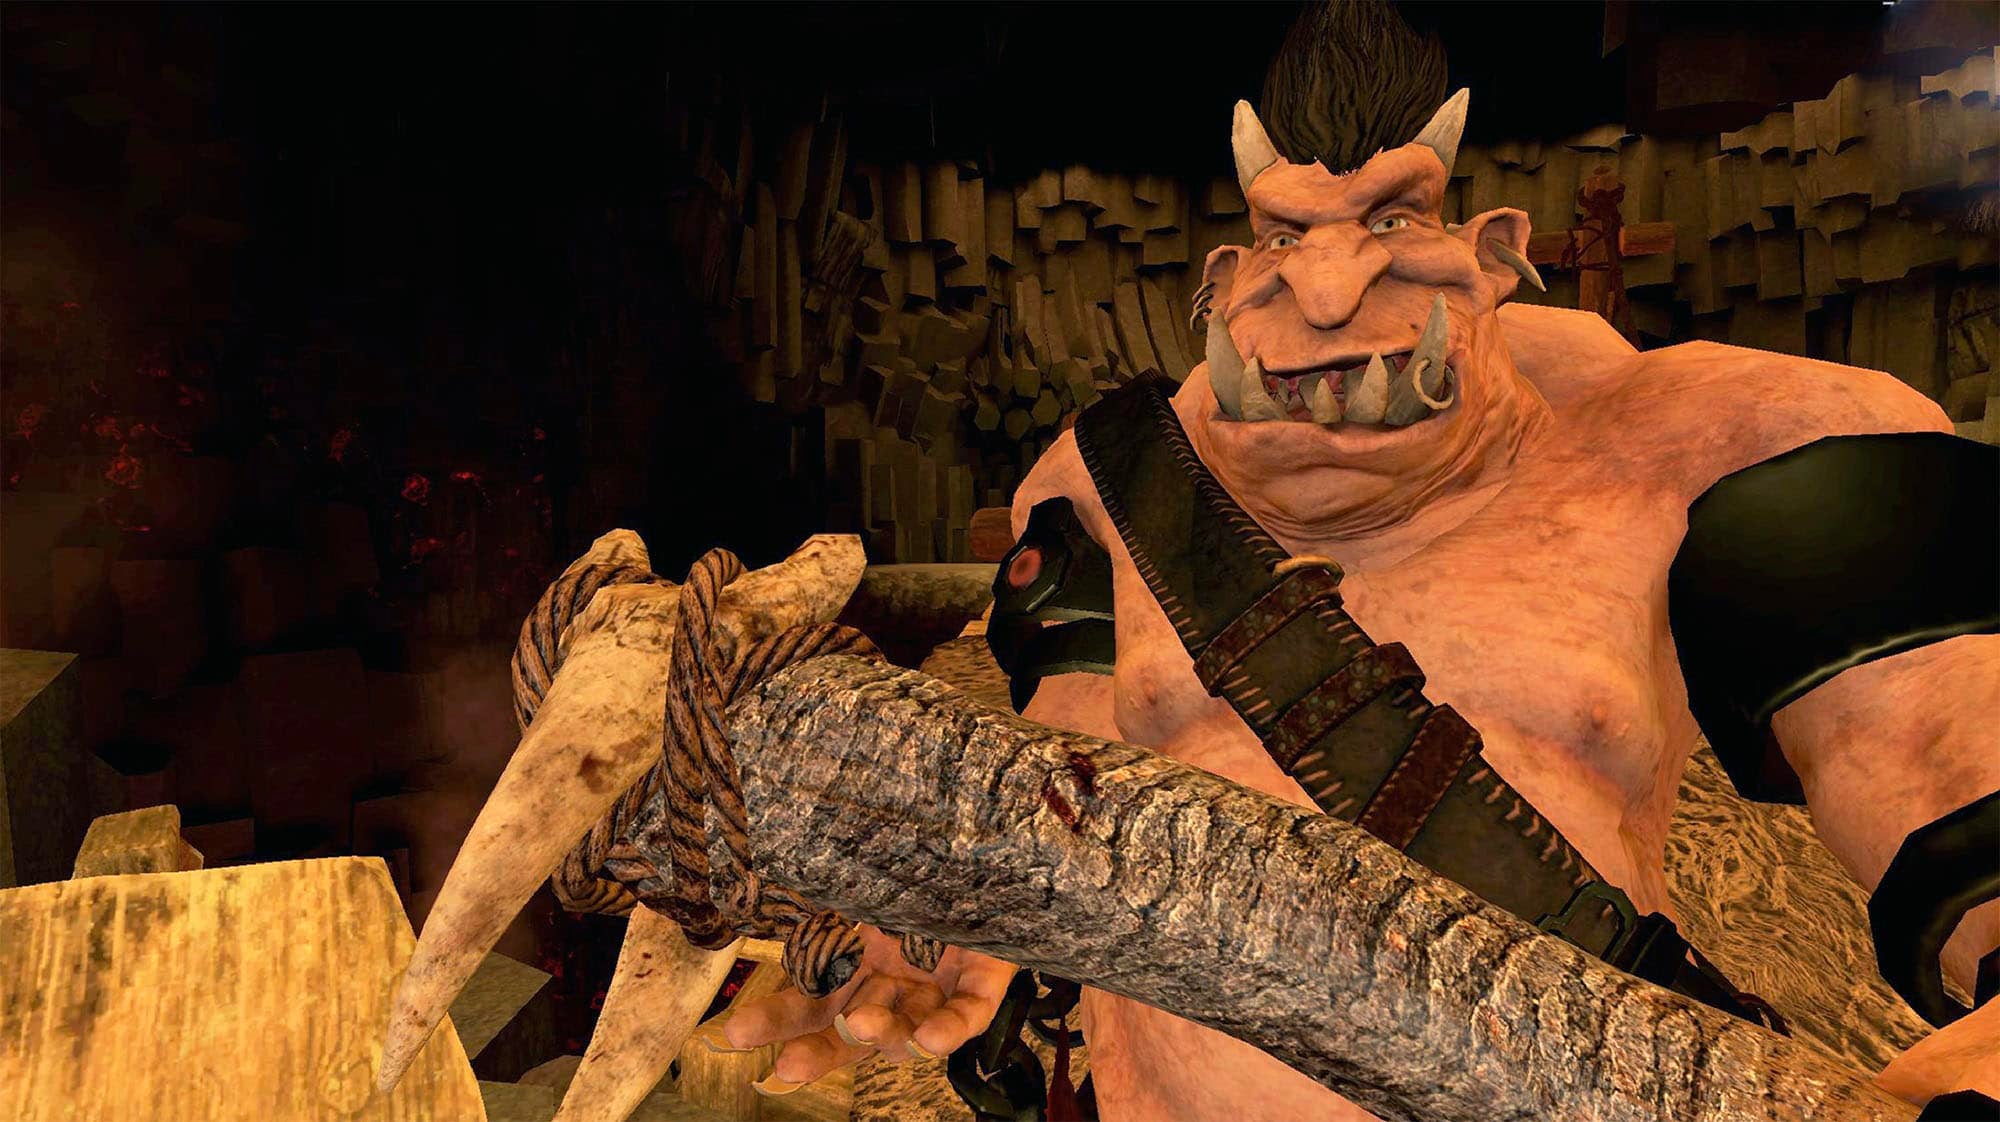 A big, fat, ogre with a big, wooden club. It's got big teeth and some horns and is orange coloured.